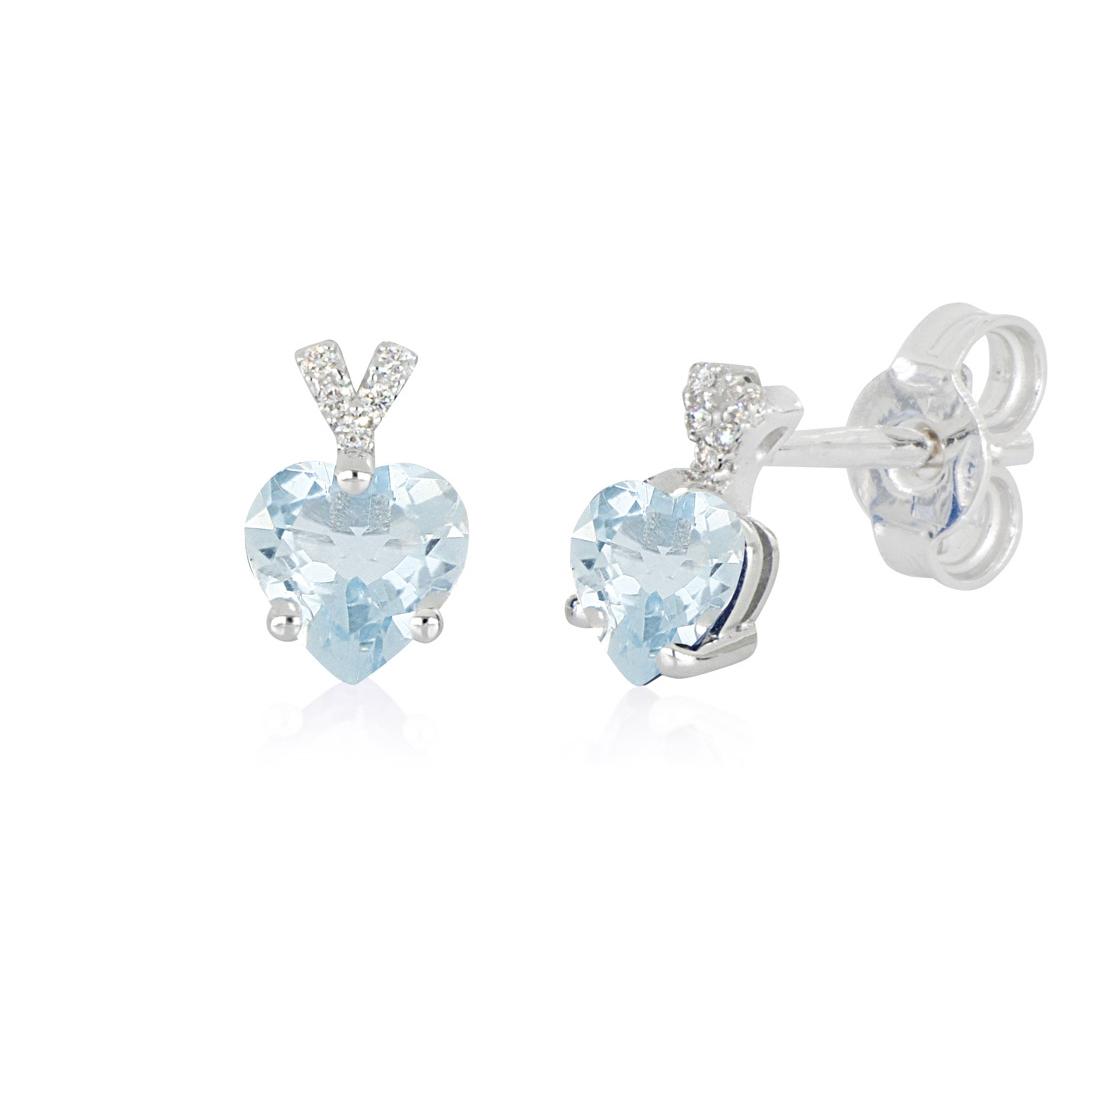 18 kt white gold earrings, with heart-shaped aquamarine and diamonds - OD466/AC-LB